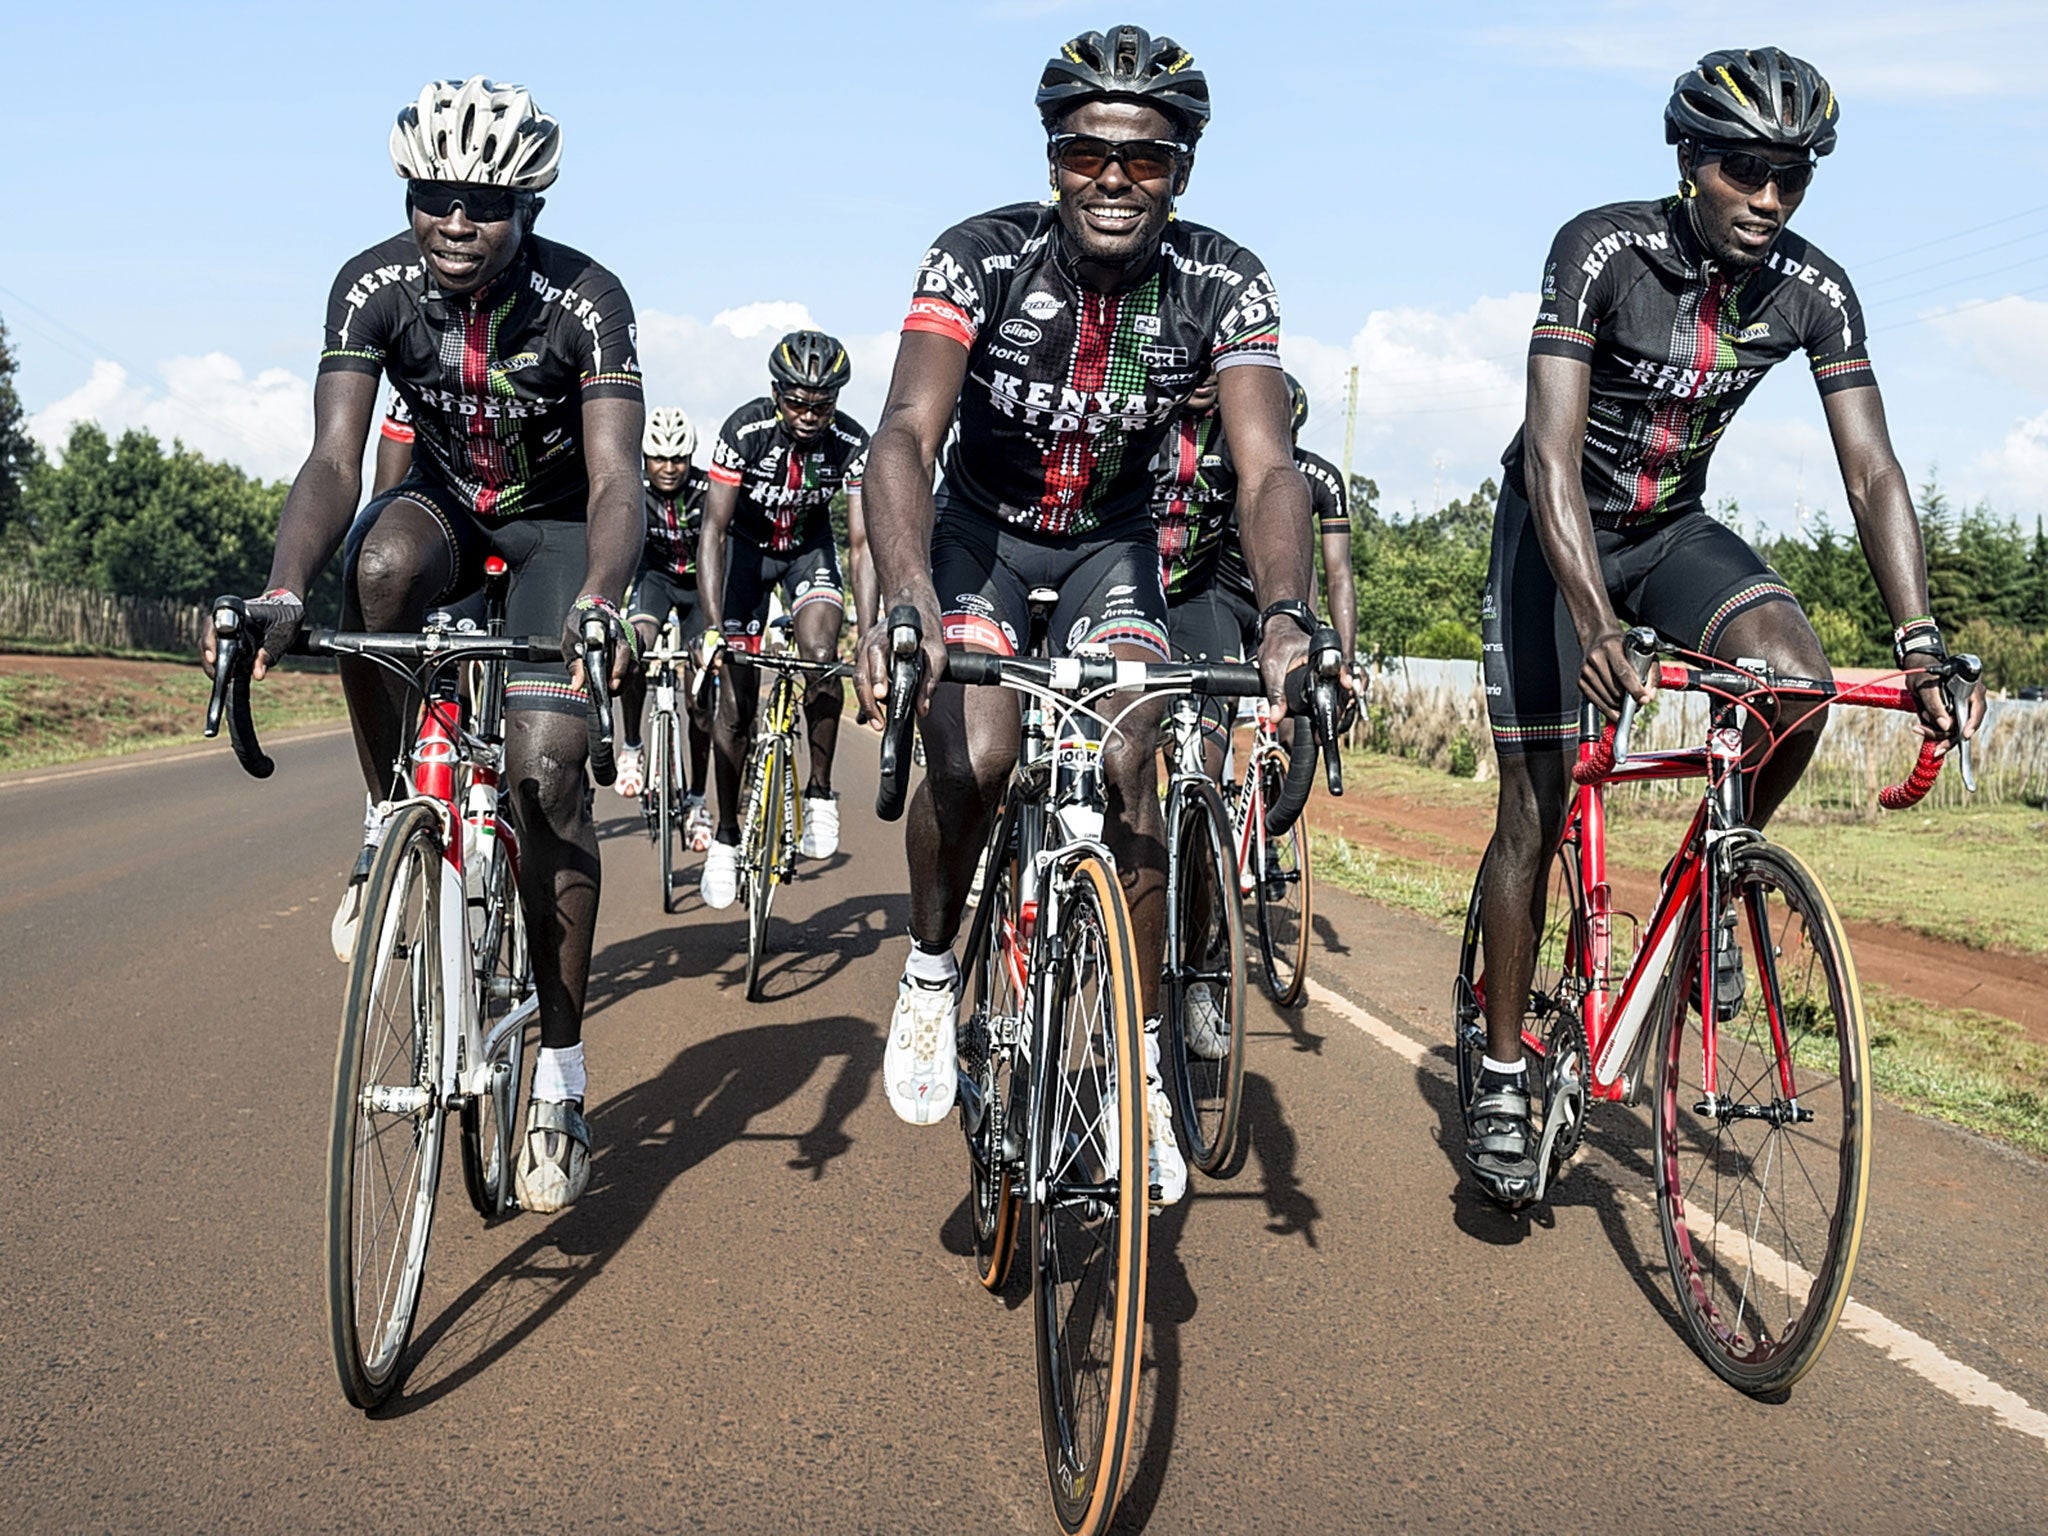 Kenyan Riders are the leading team in a country known for running; (top right) John Njoroge, who was killed in October